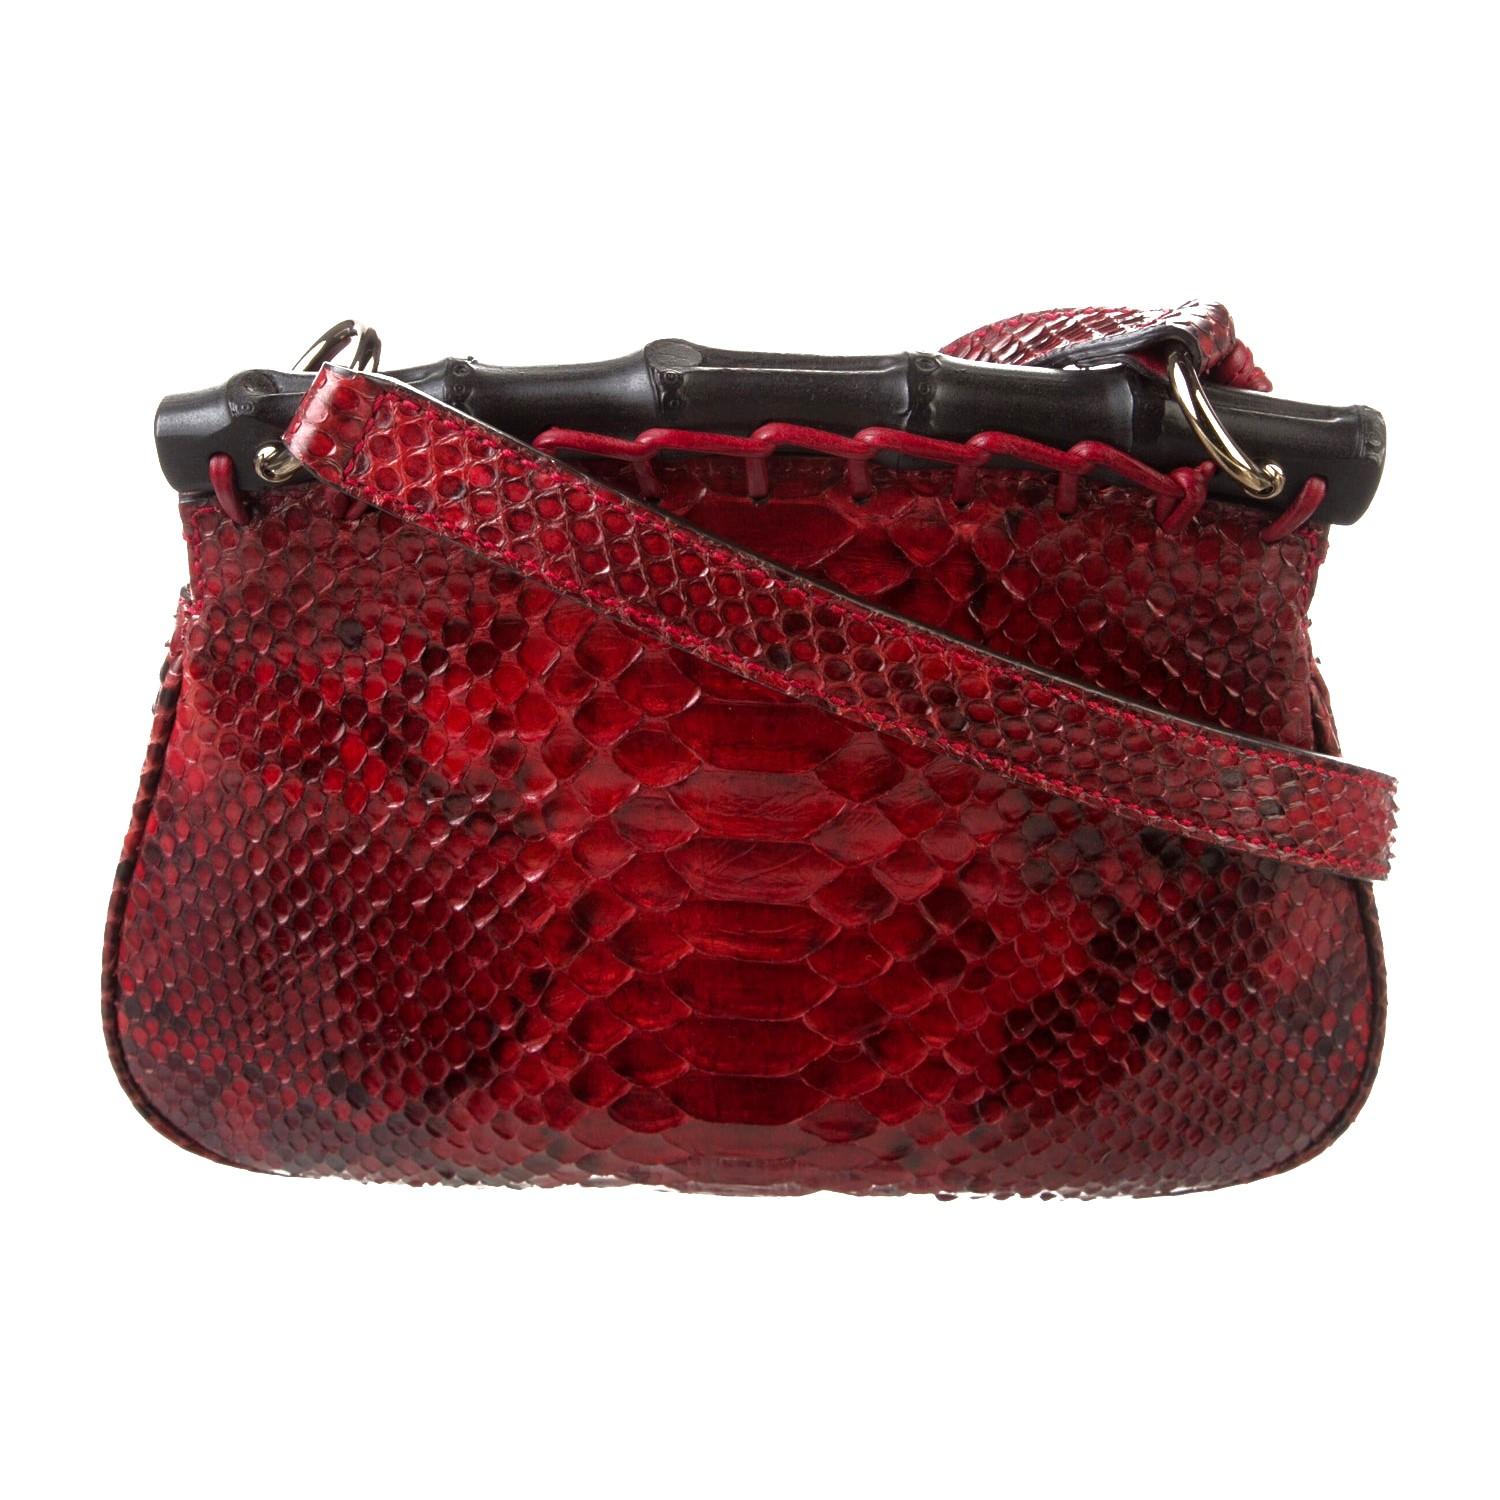 New Gucci Nouveau Python Fringe Bamboo Runway Bag in Red $3100 For Sale 11